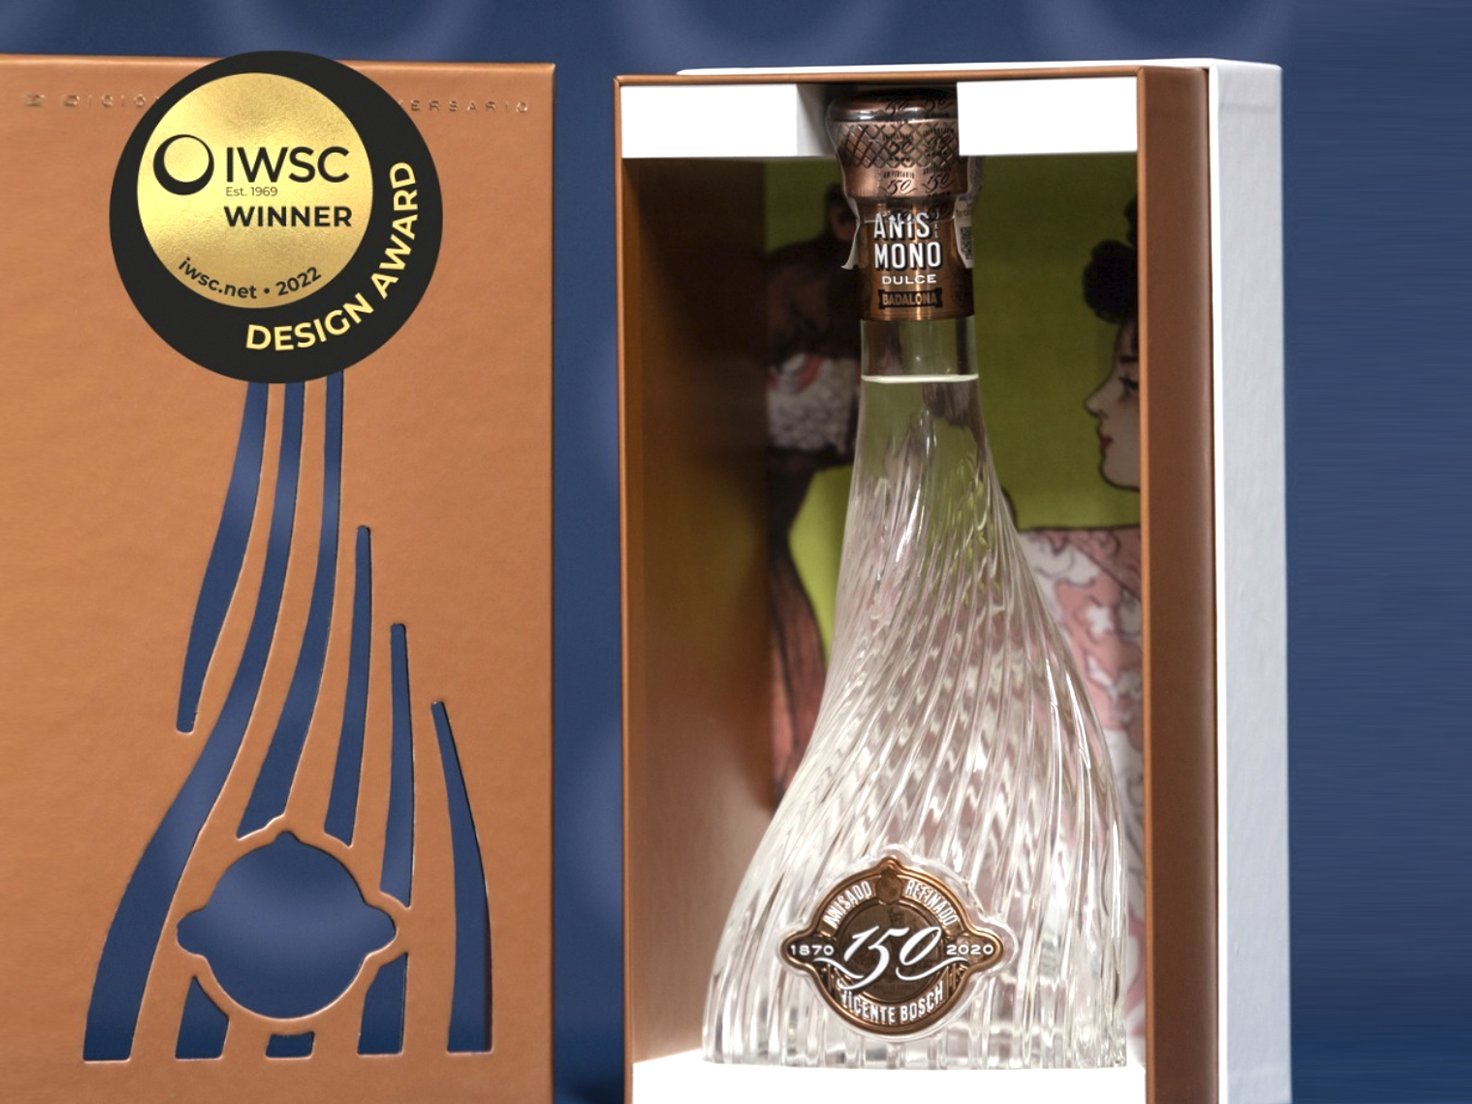 Anís del Mono winner of the IWSC price as the best "Limited Edition" design